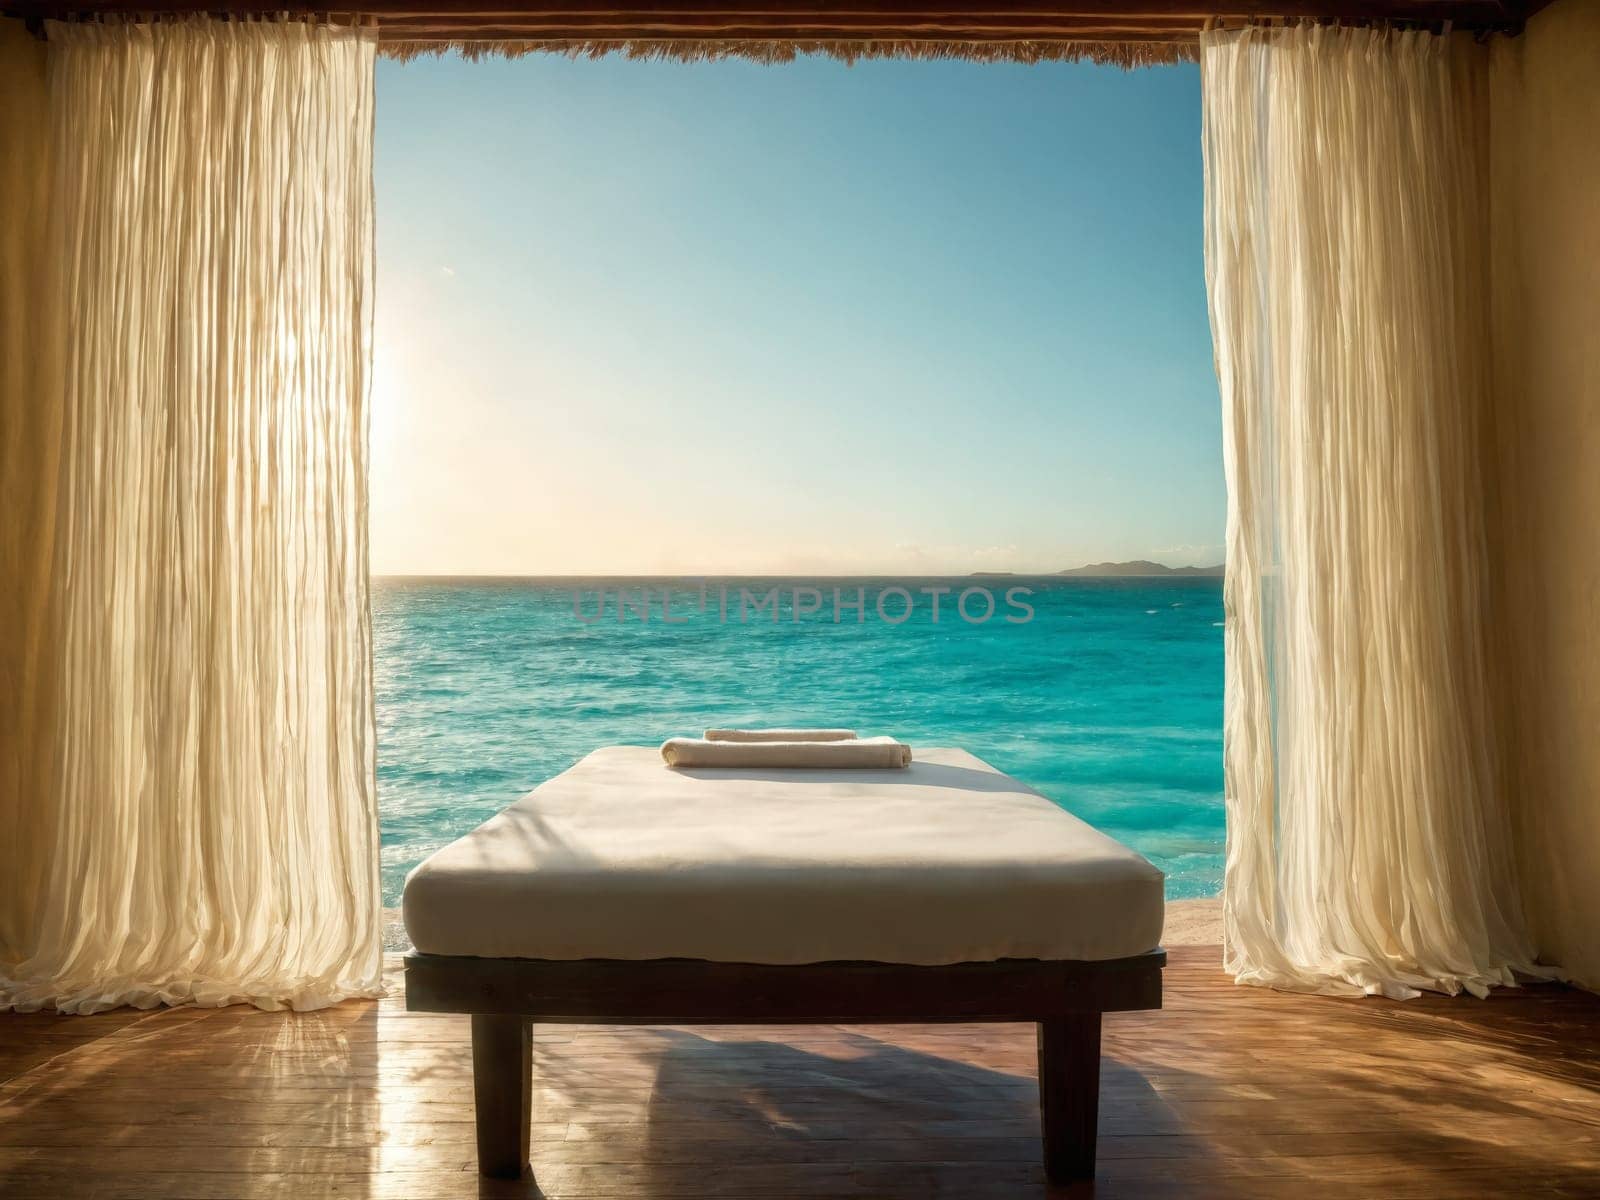 Tropical spa cabana gauzy white curtains blowing in breeze turquoise ocean in distance massage table by panophotograph